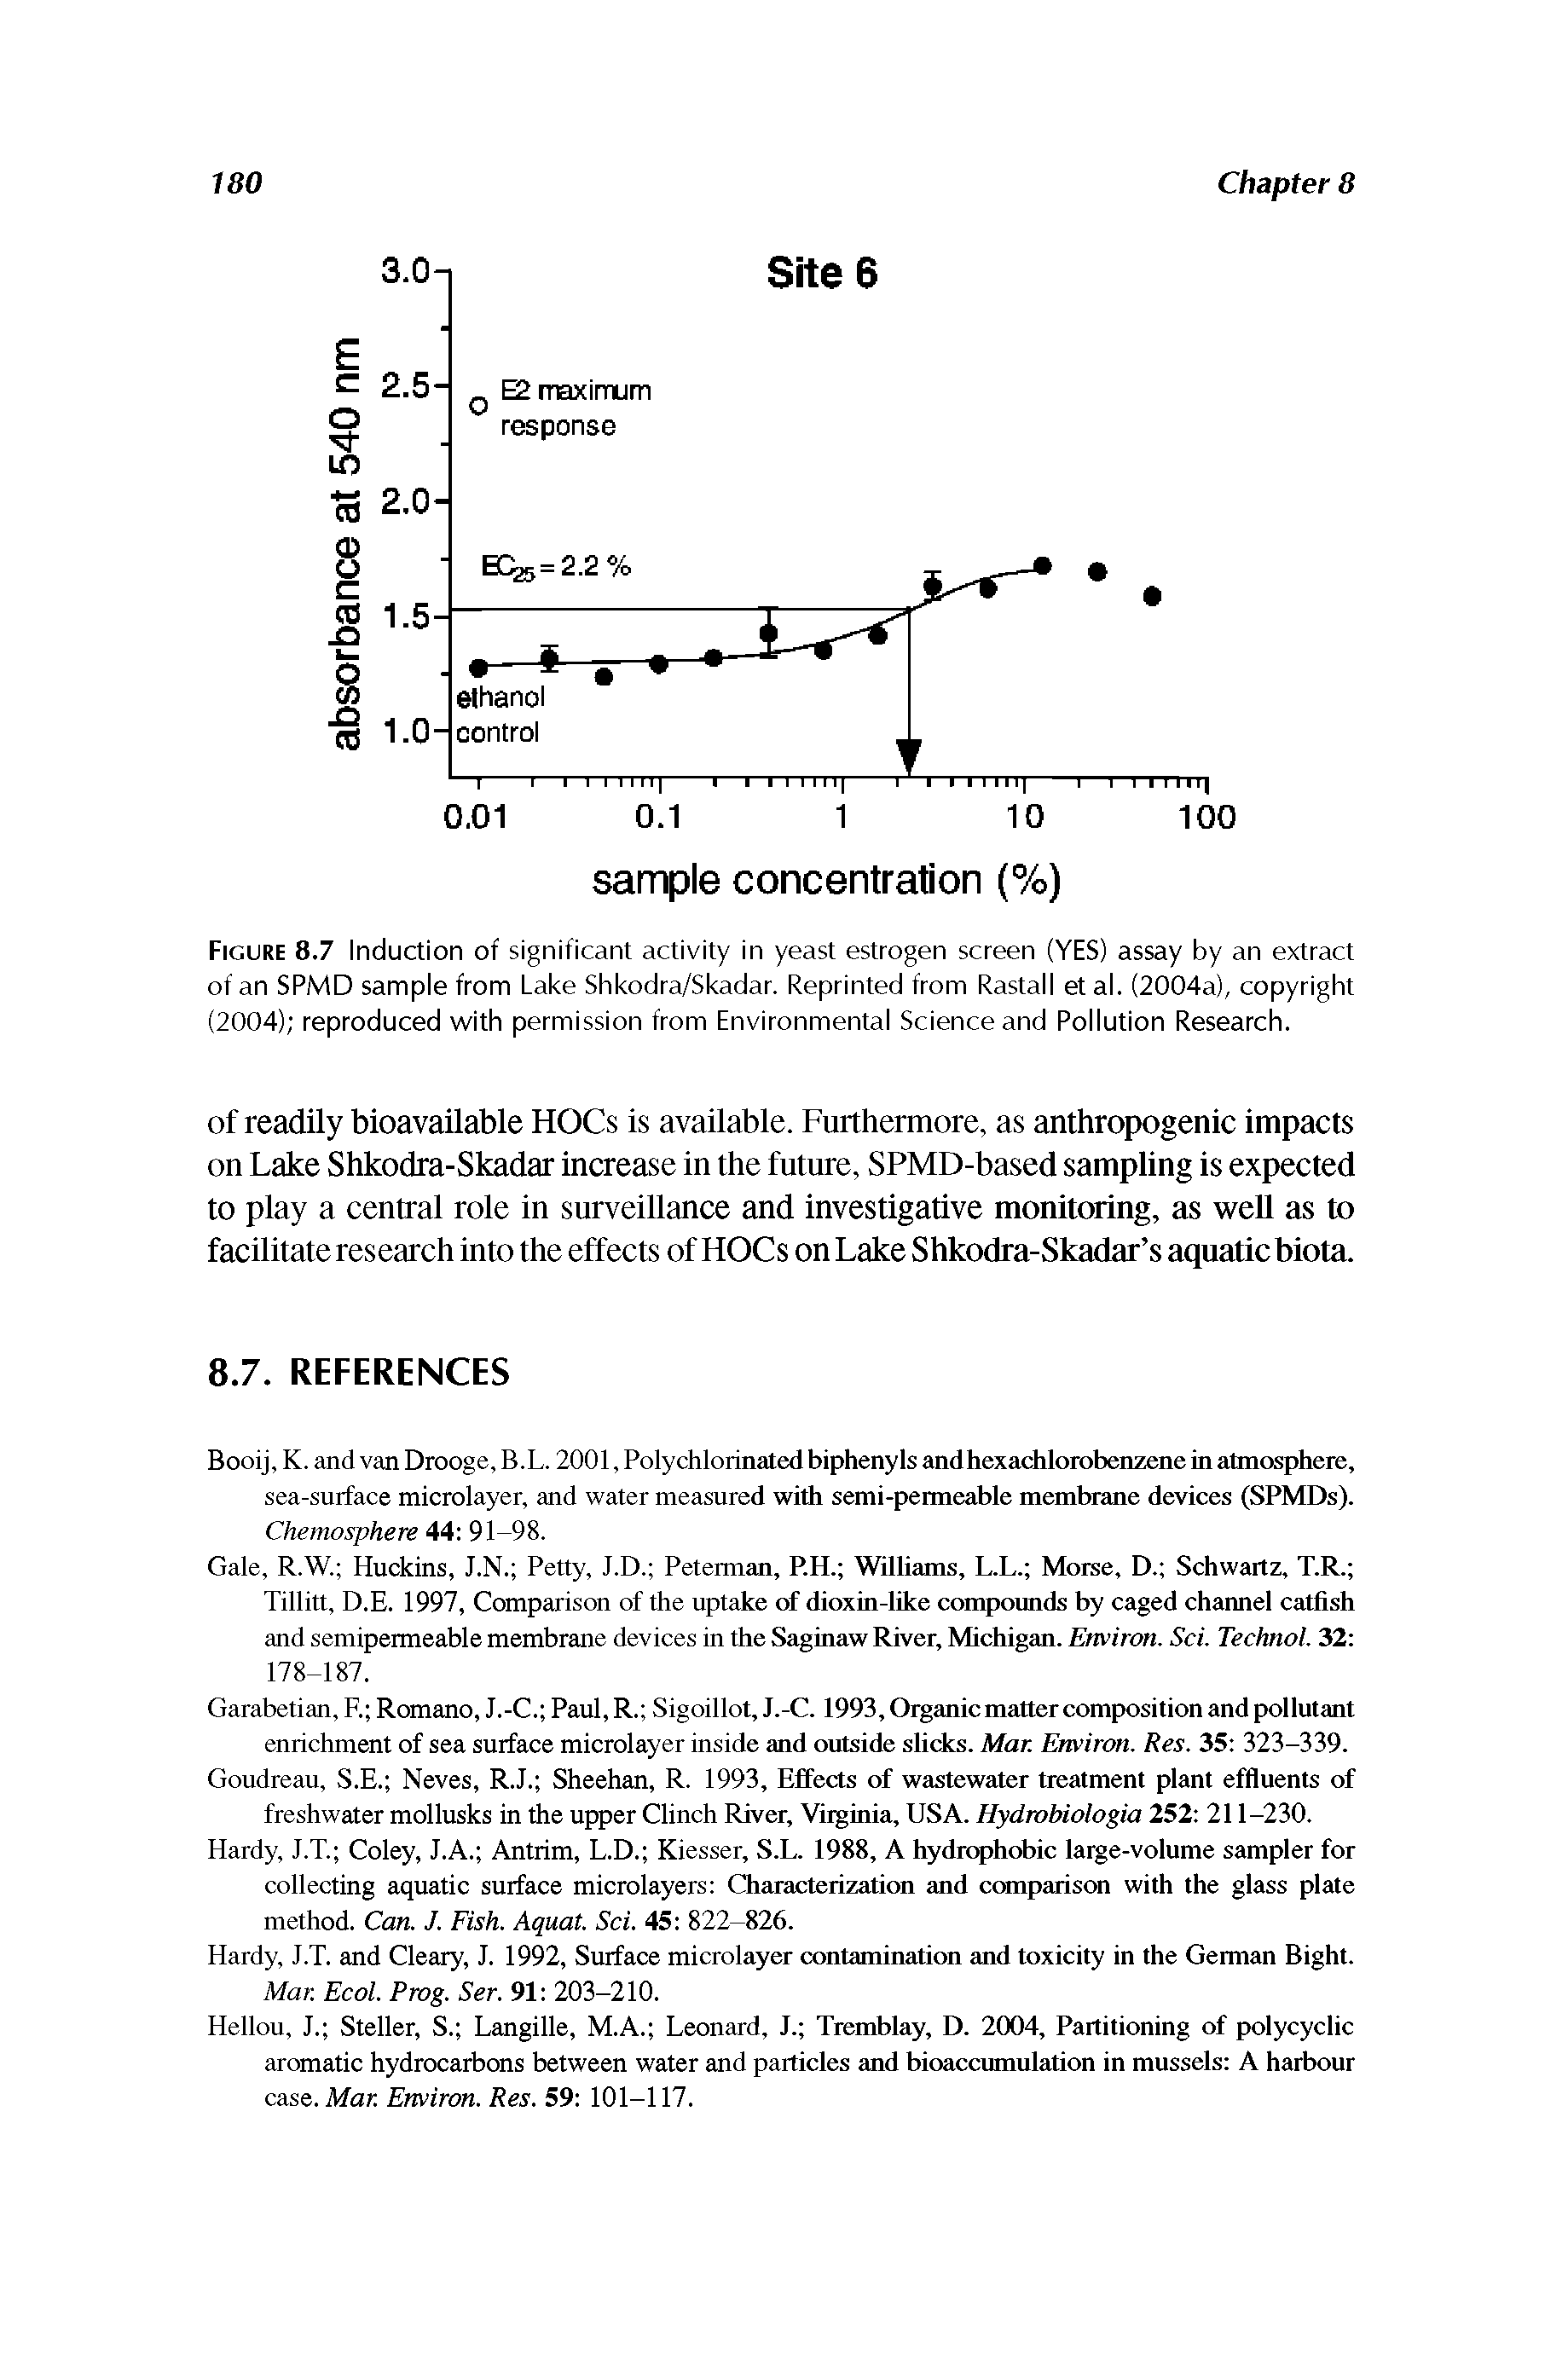 Figure 8.7 Induction of significant activity in yeast estrogen screen (YES) assay by an extract of an SPMD sample from Lake Shkodra/Skadar. Reprinted from Rastall et al. (2004a), copyright (2004) reproduced with permission from Environmental Science and Pollution Research.